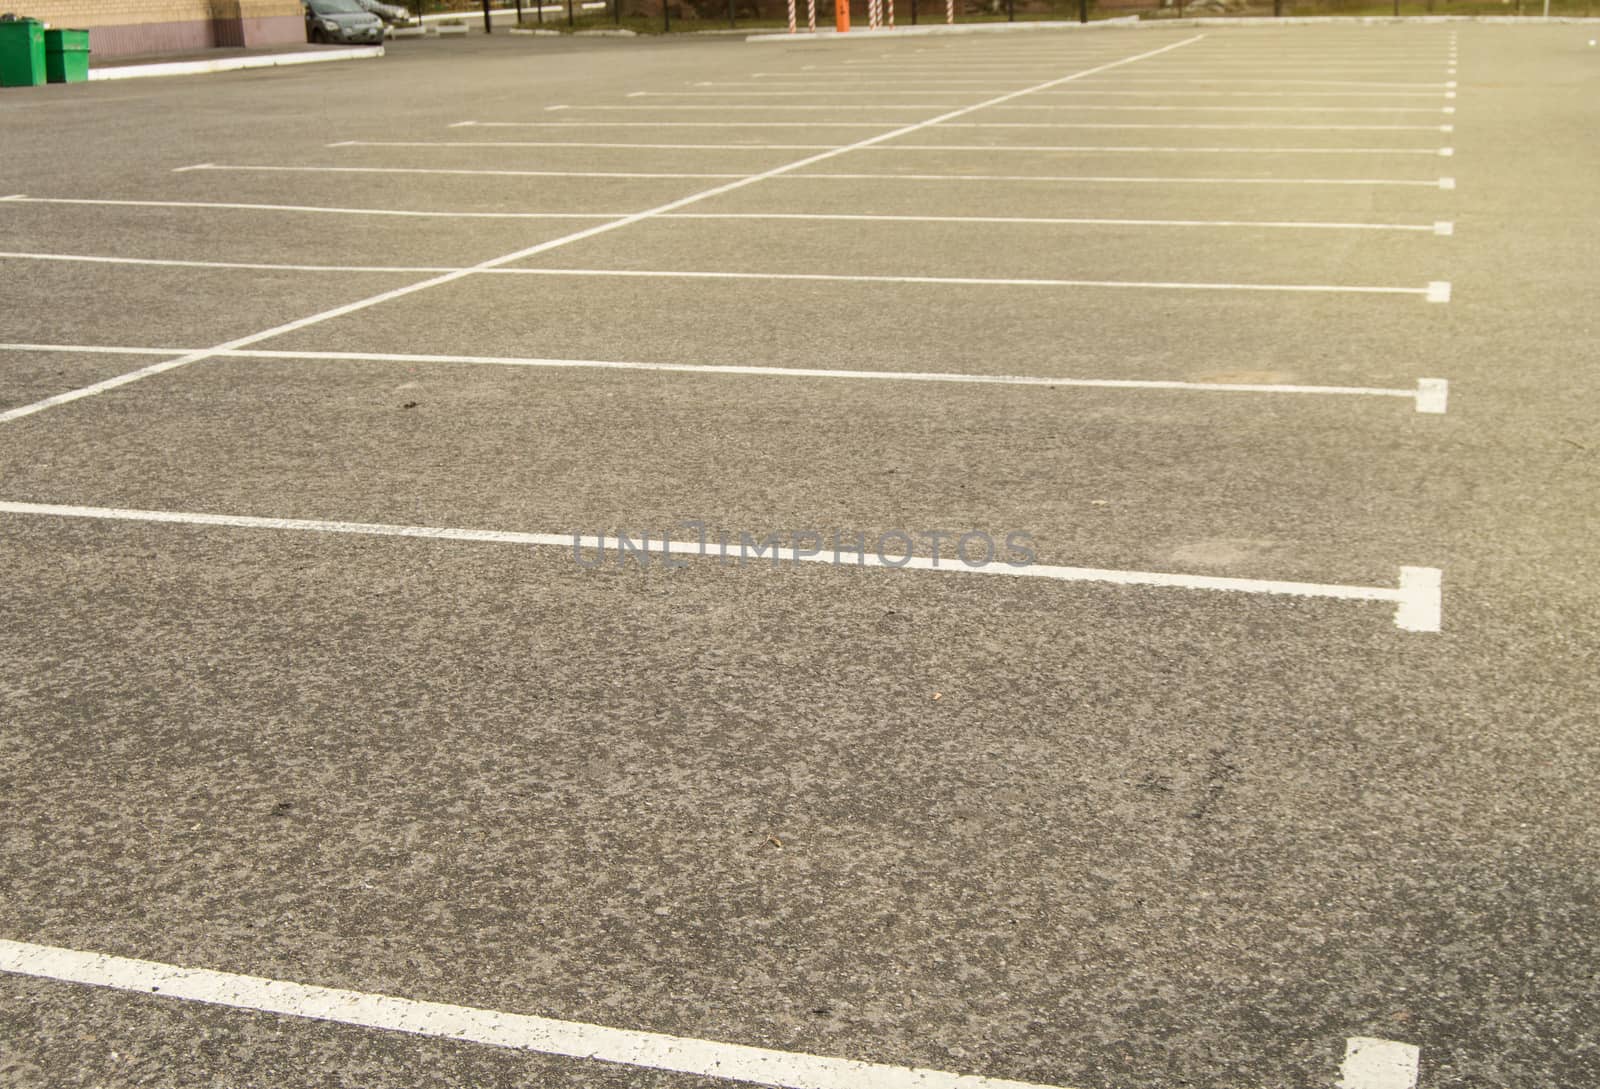 Road marking on an empty asphalt Parking lot, a copy of the space, mockup.